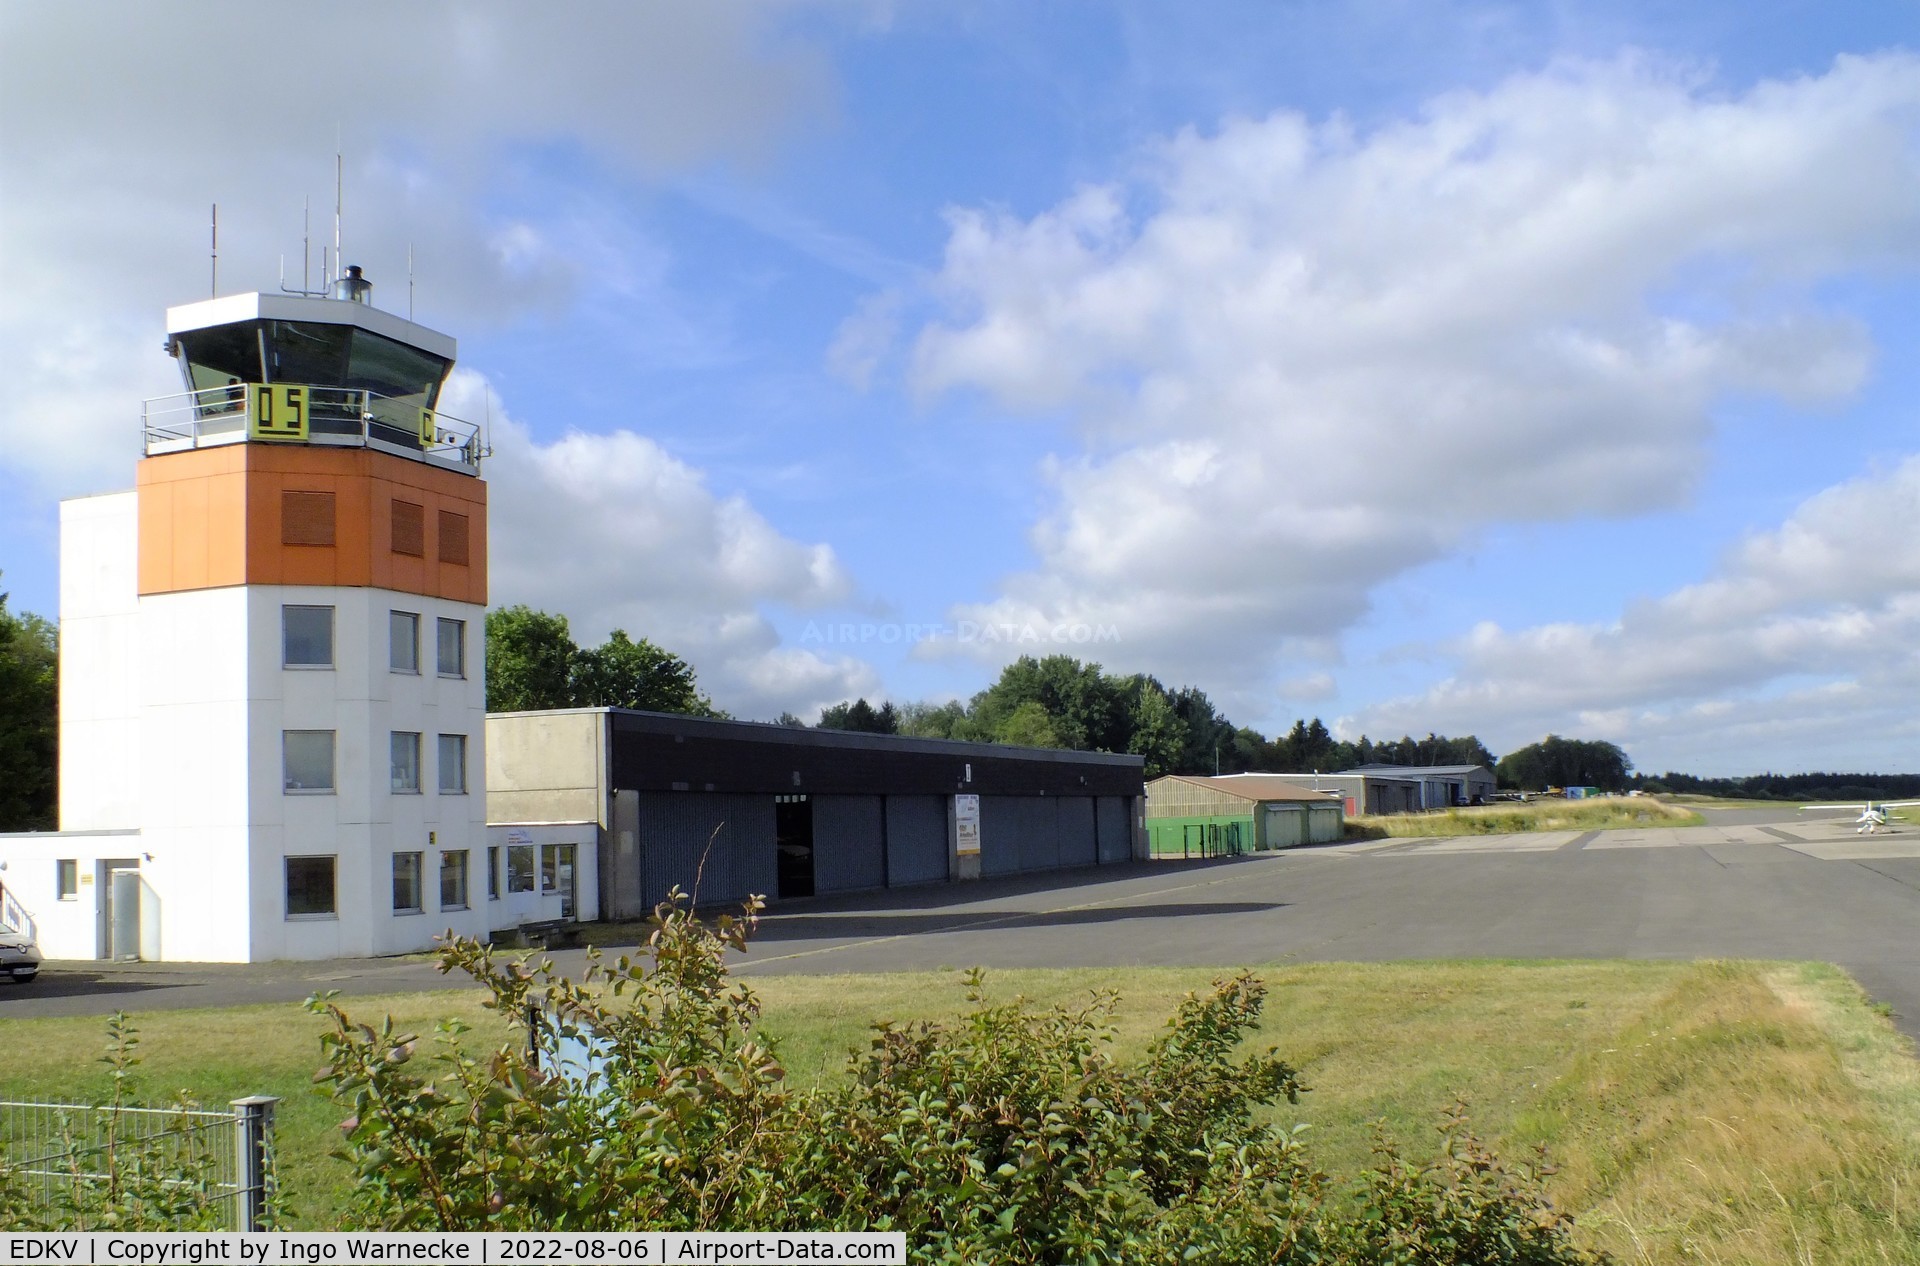 Dahlemer Binz Airport, Dahlem Germany (EDKV) - tower and western hangars at Dahlemer Binz airfield